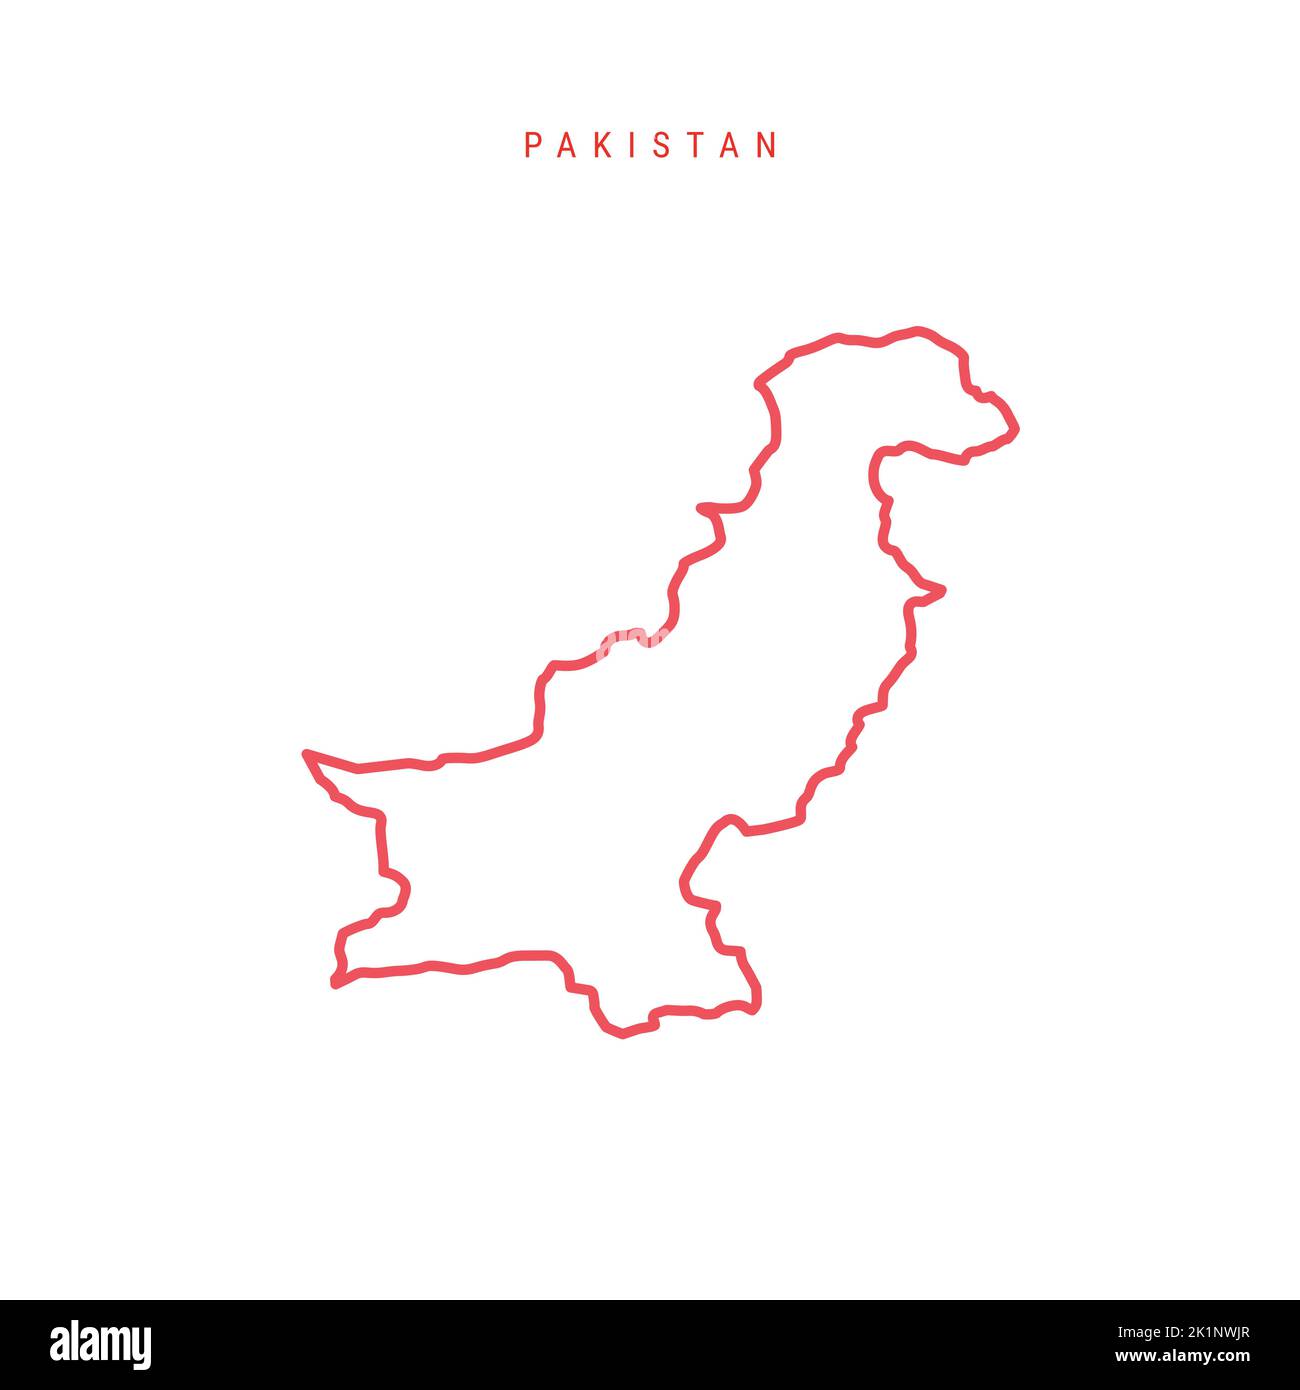 Pakistan editable outline map. Pakistani red border. Country name. Adjust line weight. Change to any color. Vector illustration. Stock Vector